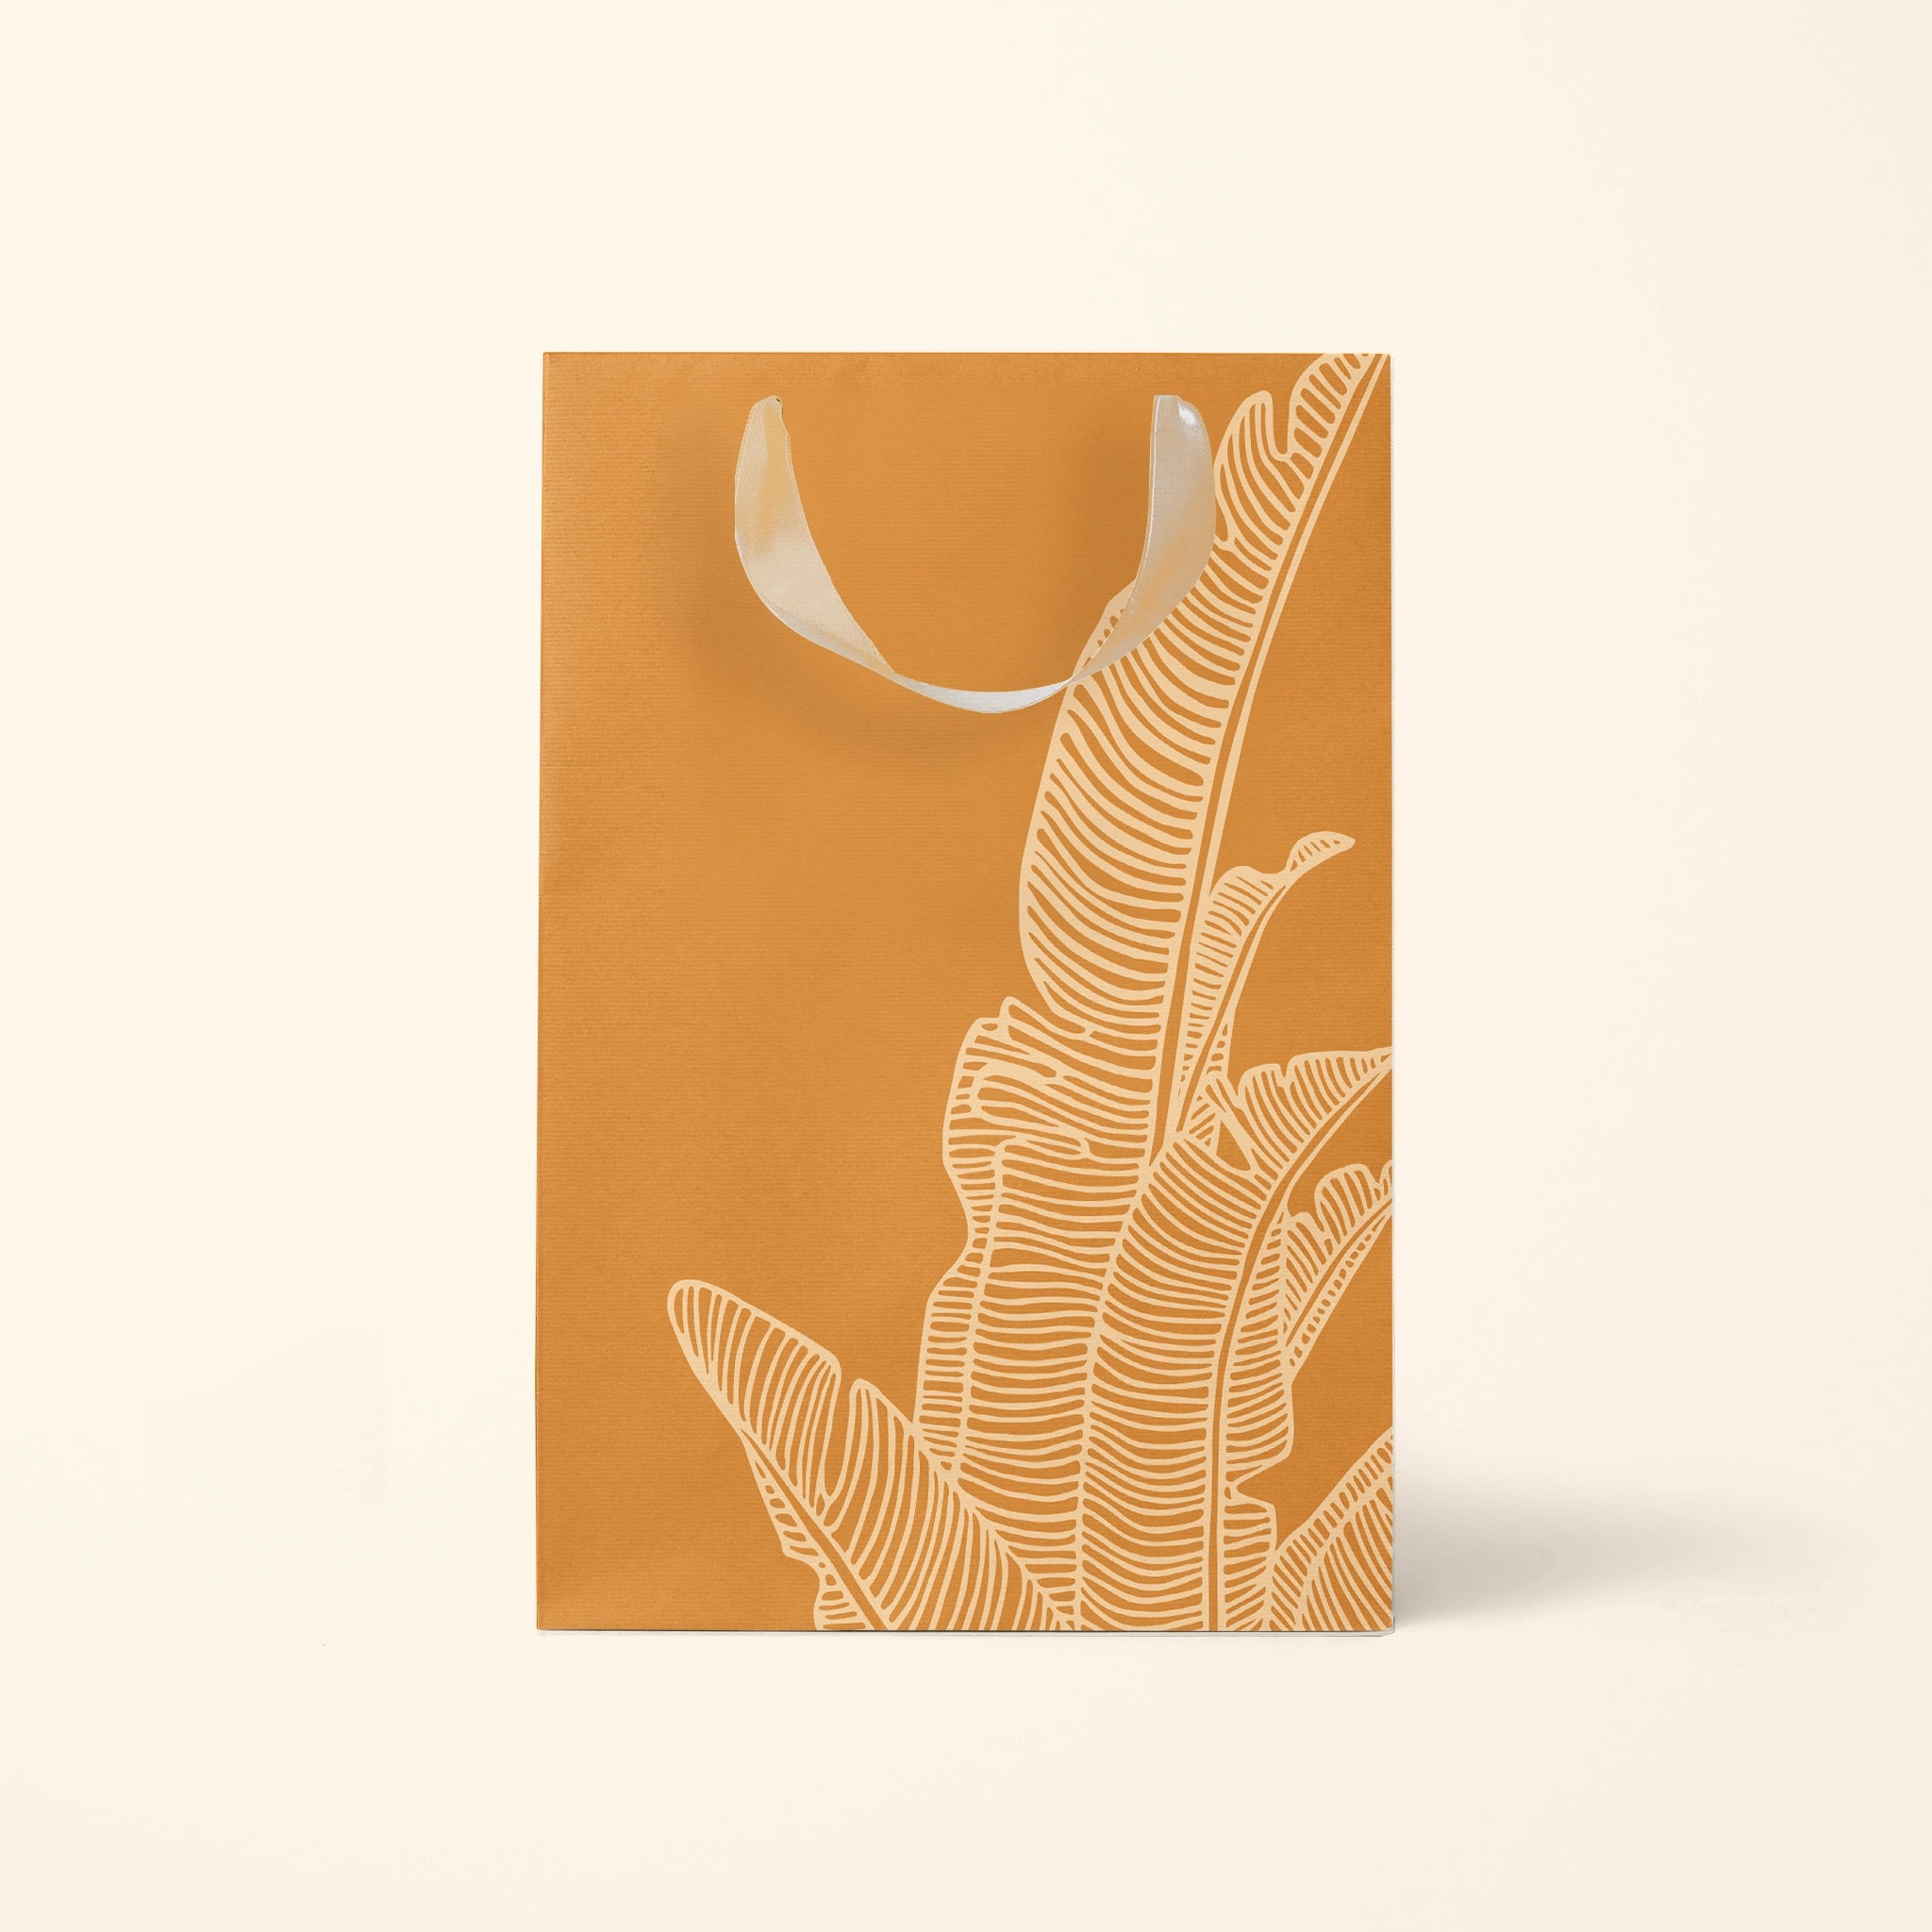 The medium orange gift bag with a cream bird of paradise line drawing design as well as cream ribbon handles.